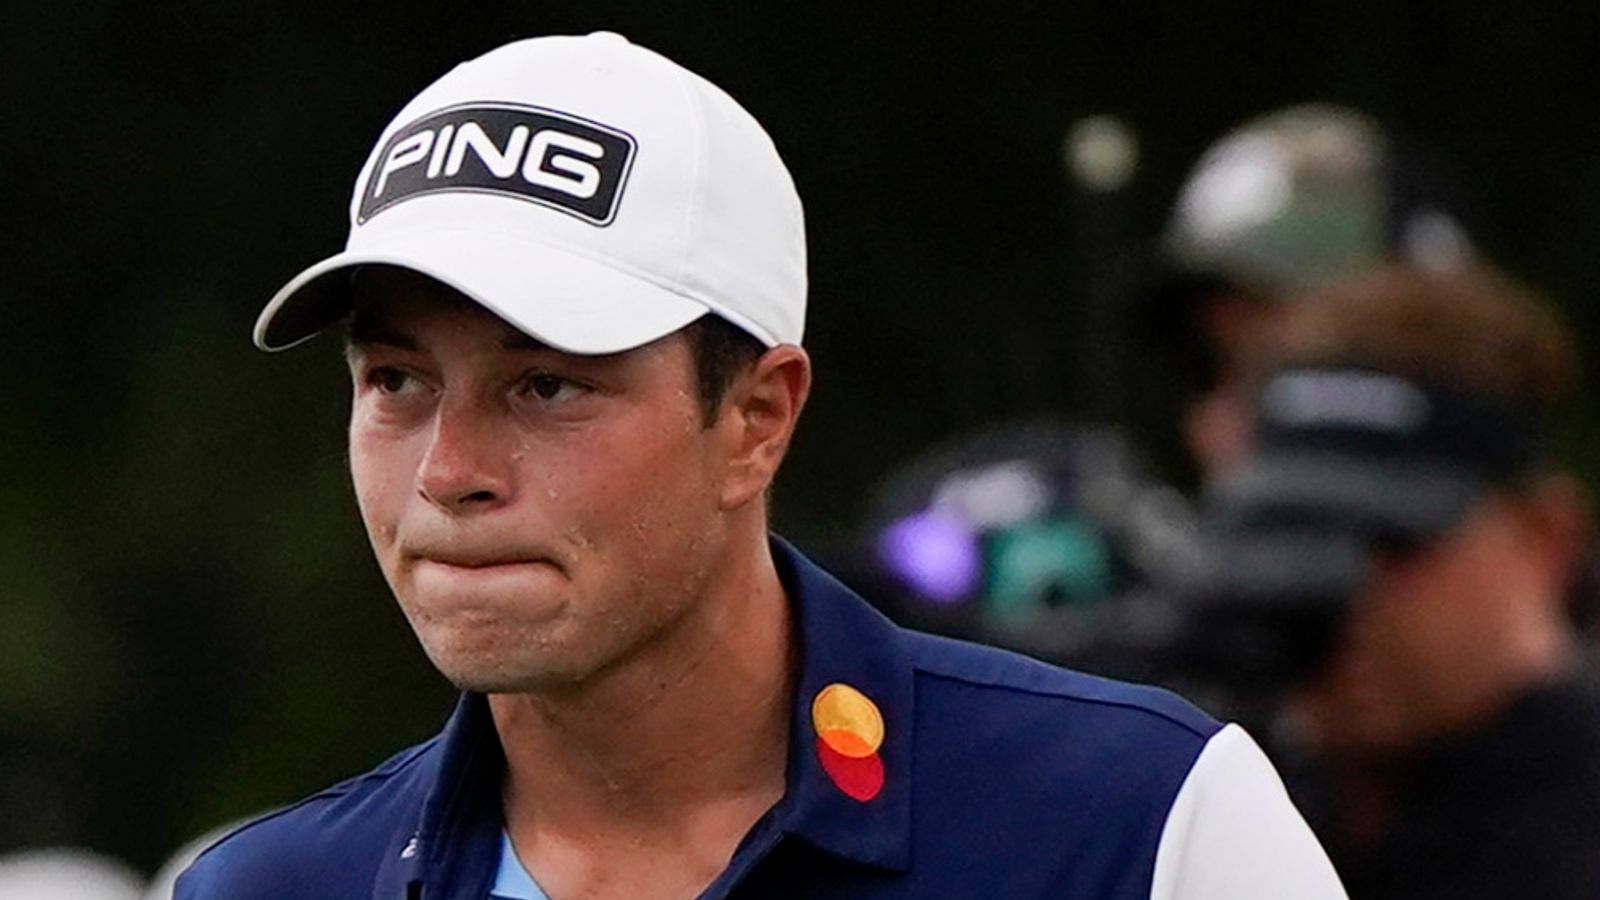 Tour Championship: Viktor Hovland holds off Xander Schauffele to claim dominant FedExCup victory | Golf News